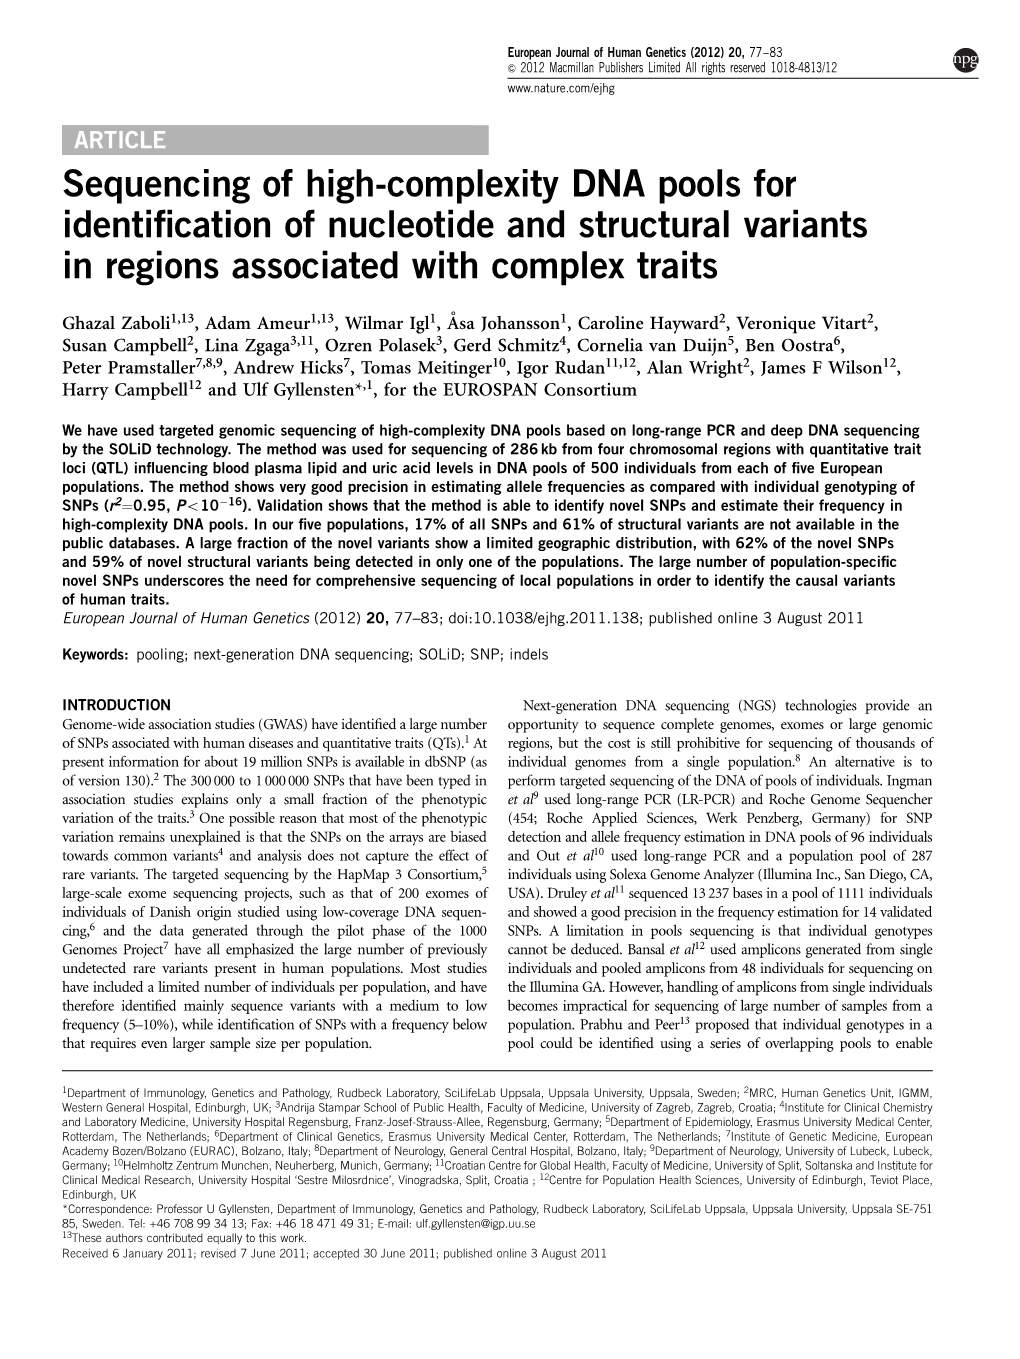 Sequencing of High-Complexity DNA Pools for Identification of Nucleotide